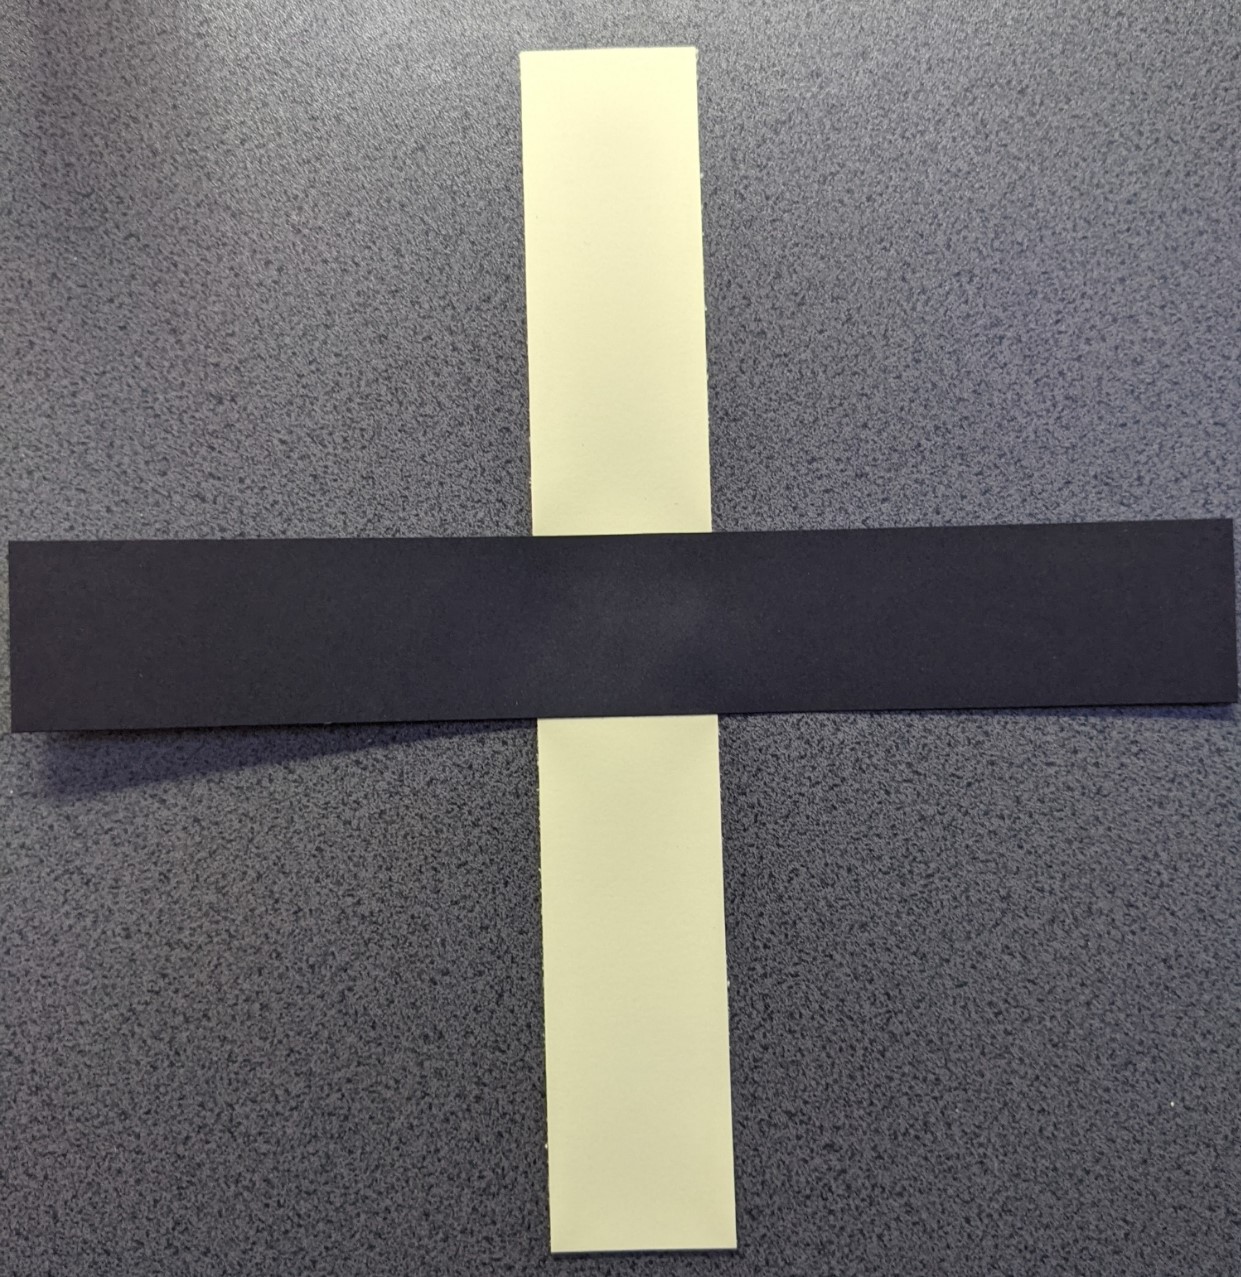 Two strips of card glued at their centres to form a cross